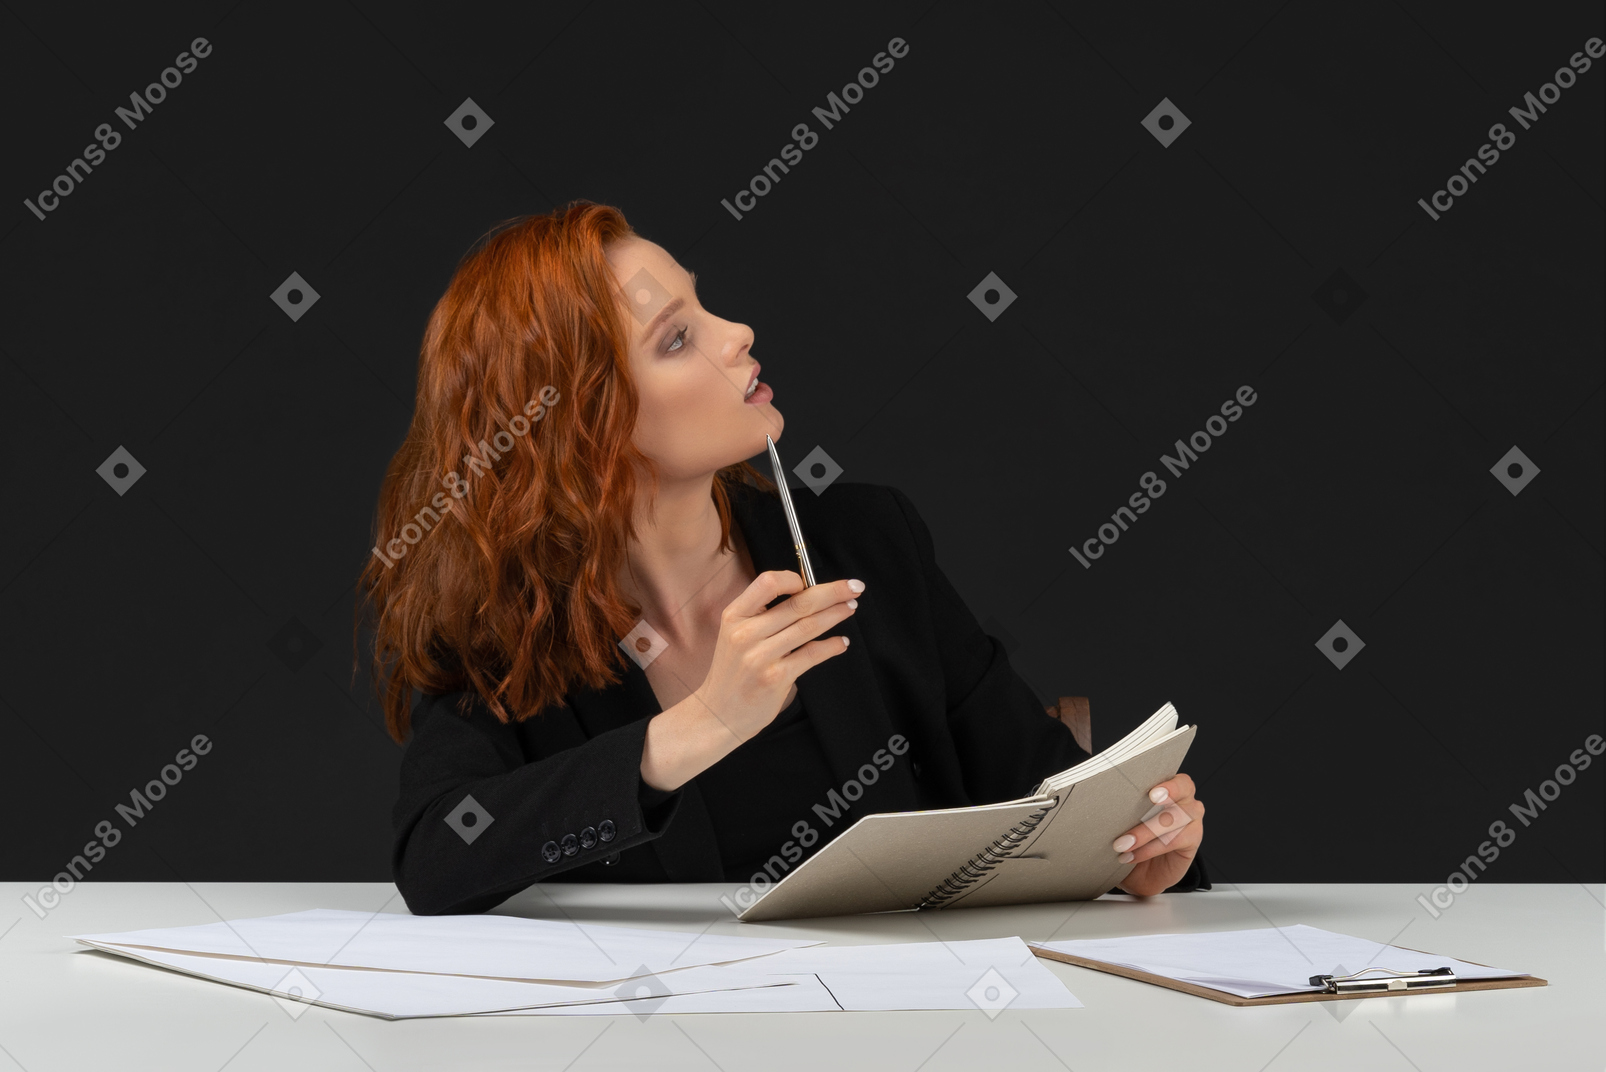 Woman with pen and notebook thinking